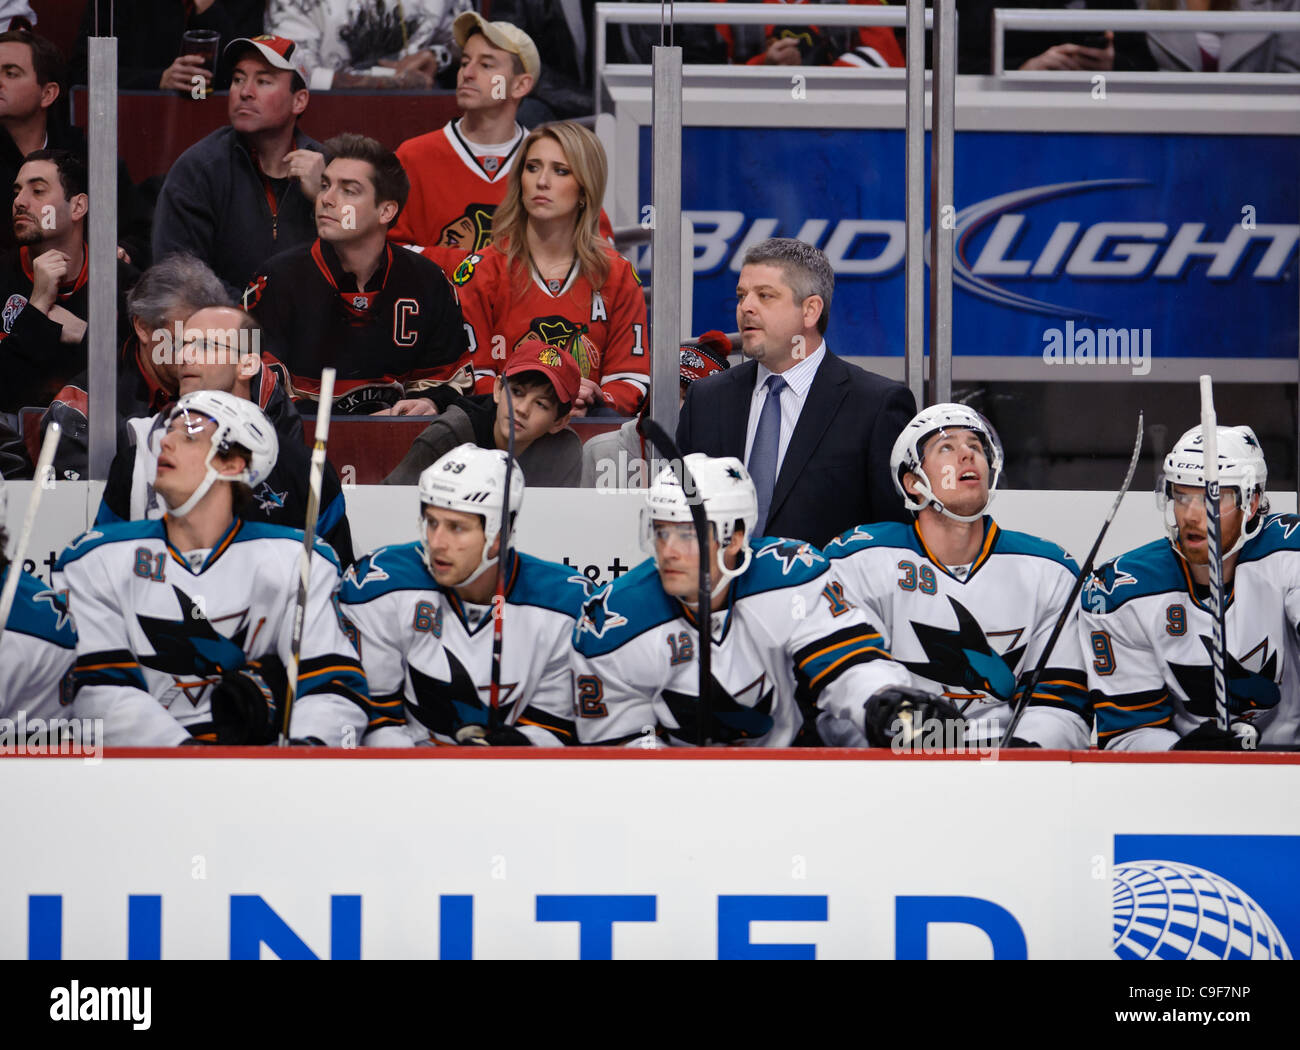 Dec. 11, 2011 - Chicago, Illinois, U.S - San Jose head coach Todd McLellan watches from the bench during the NHL game between the Chicago Blackhawks and the San Jose Sharks at the United Center in Chicago, IL. The Blackhawks defeated the Sharks 3-2 in overtime. (Credit Image: © John Rowland/Southcre Stock Photo